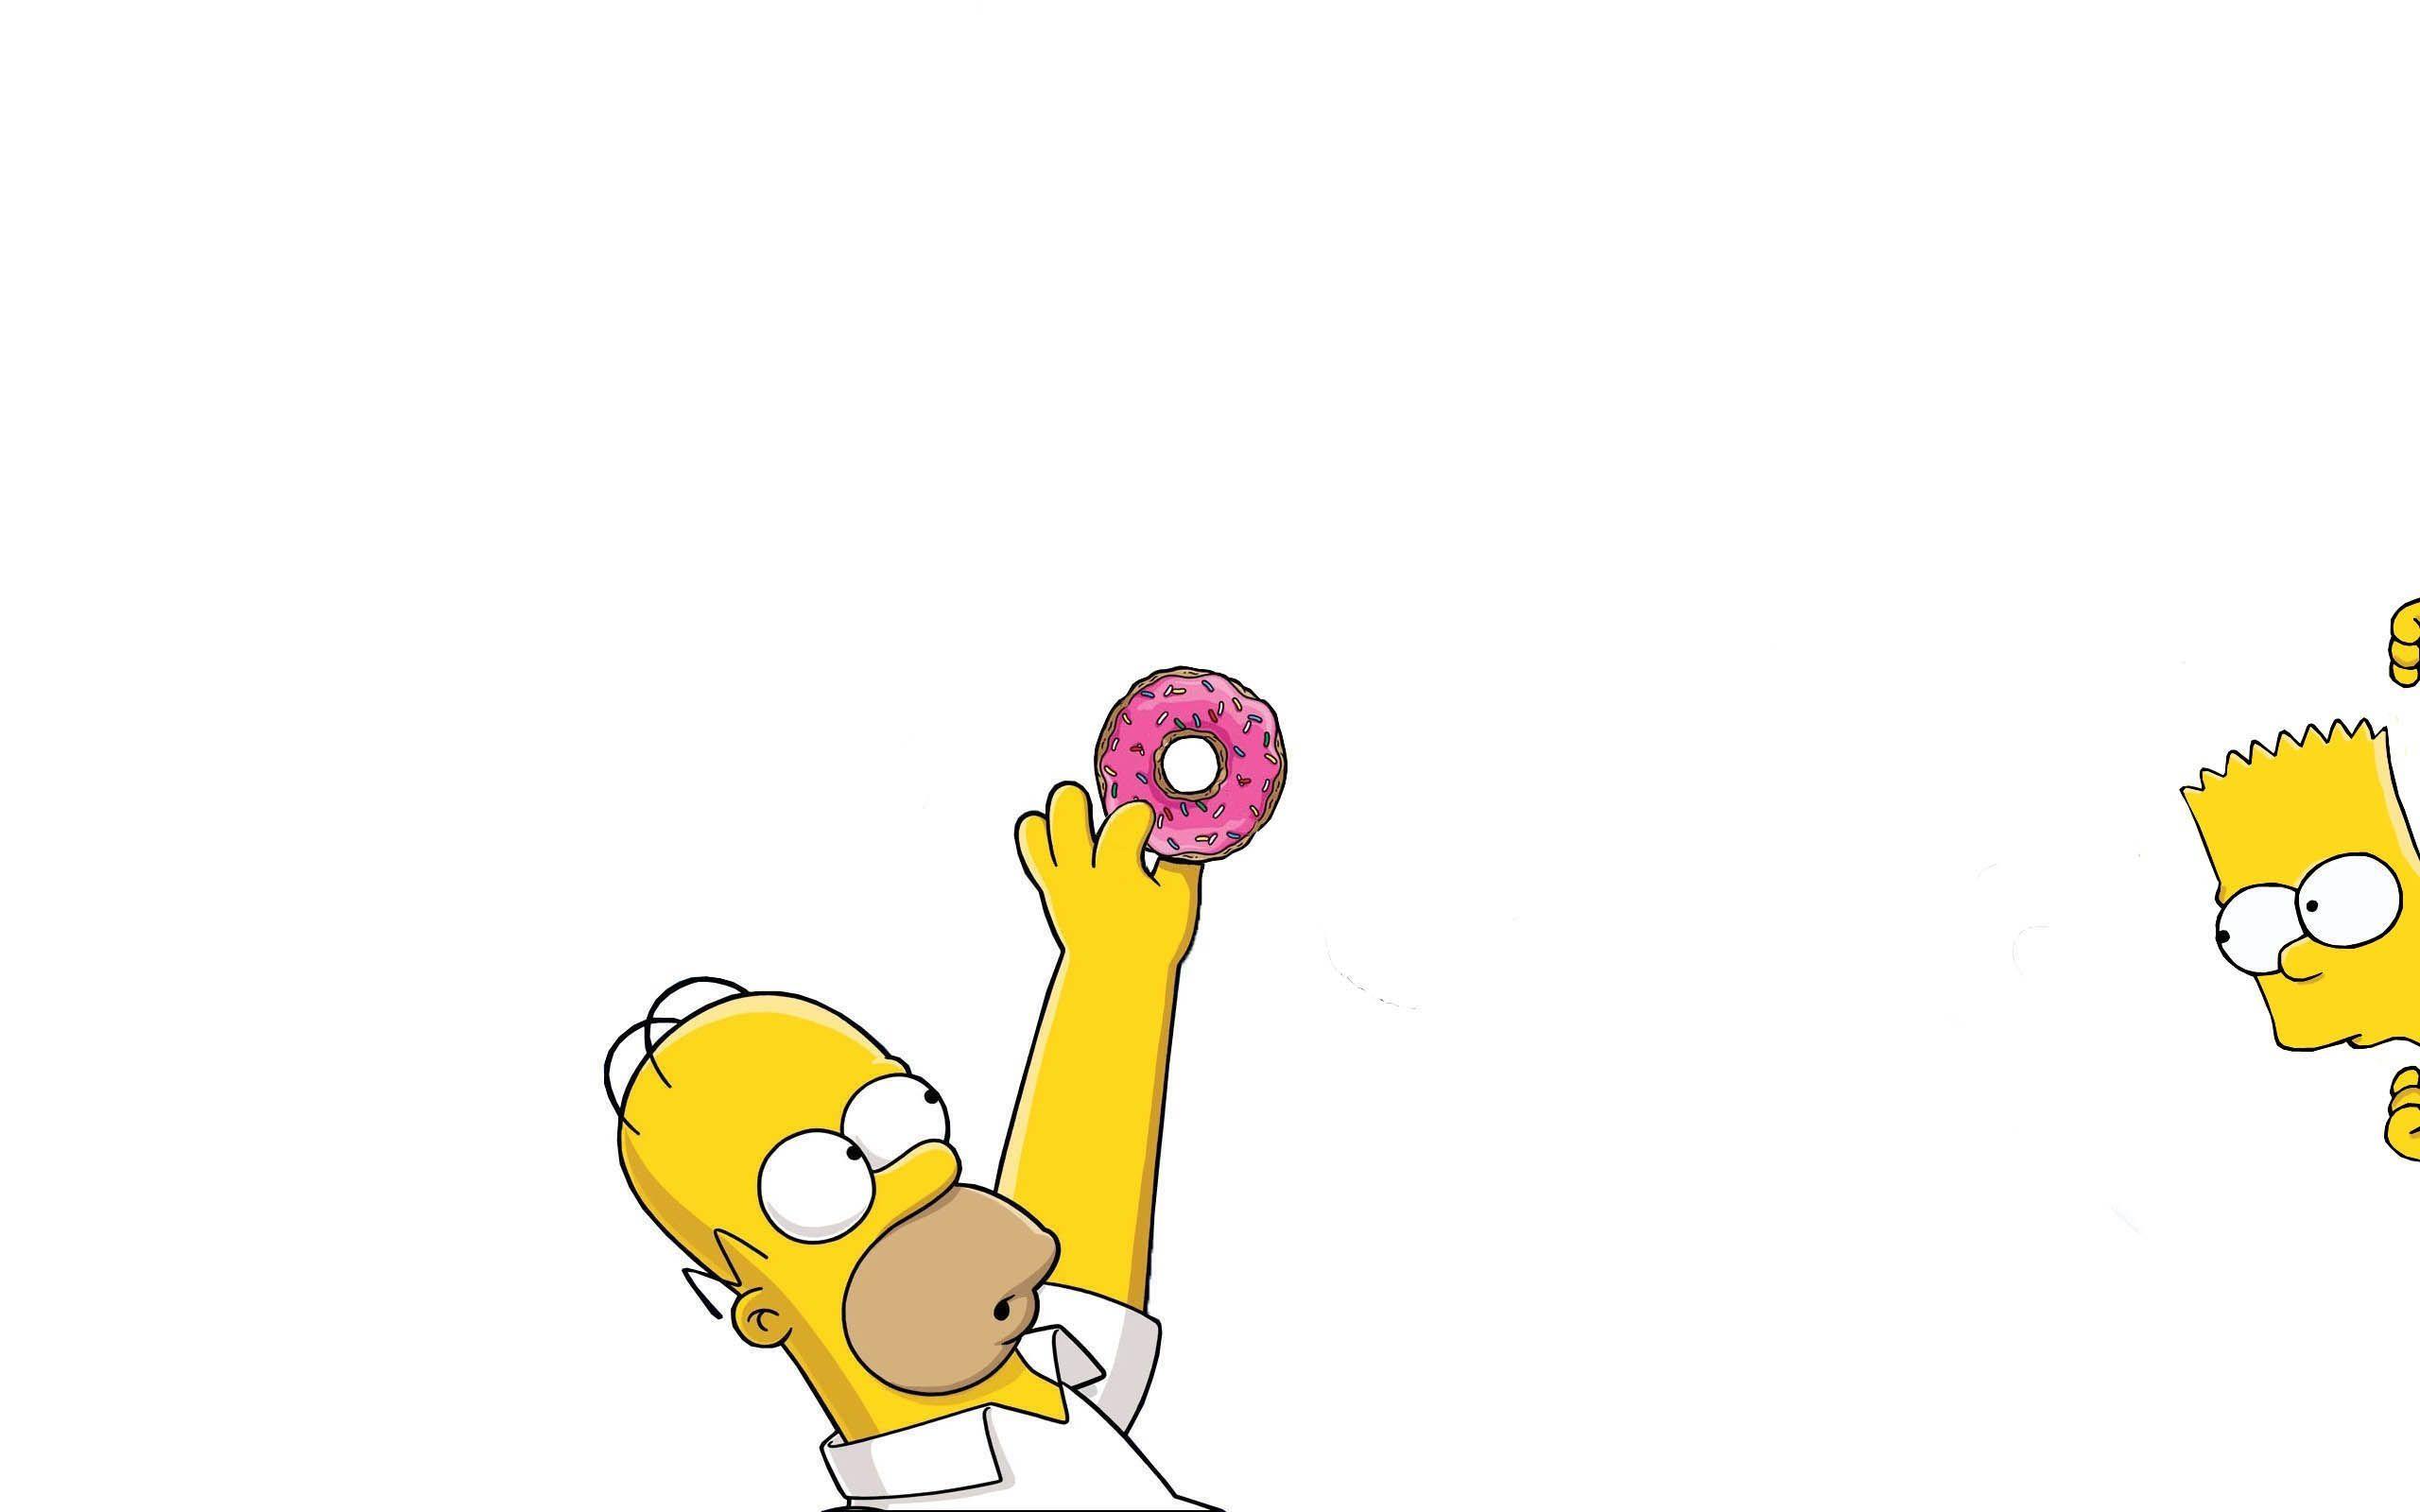 2560x1600 The Simpsons│ Los Simpson - #Simpson - #Homer - #Marge - #Bart